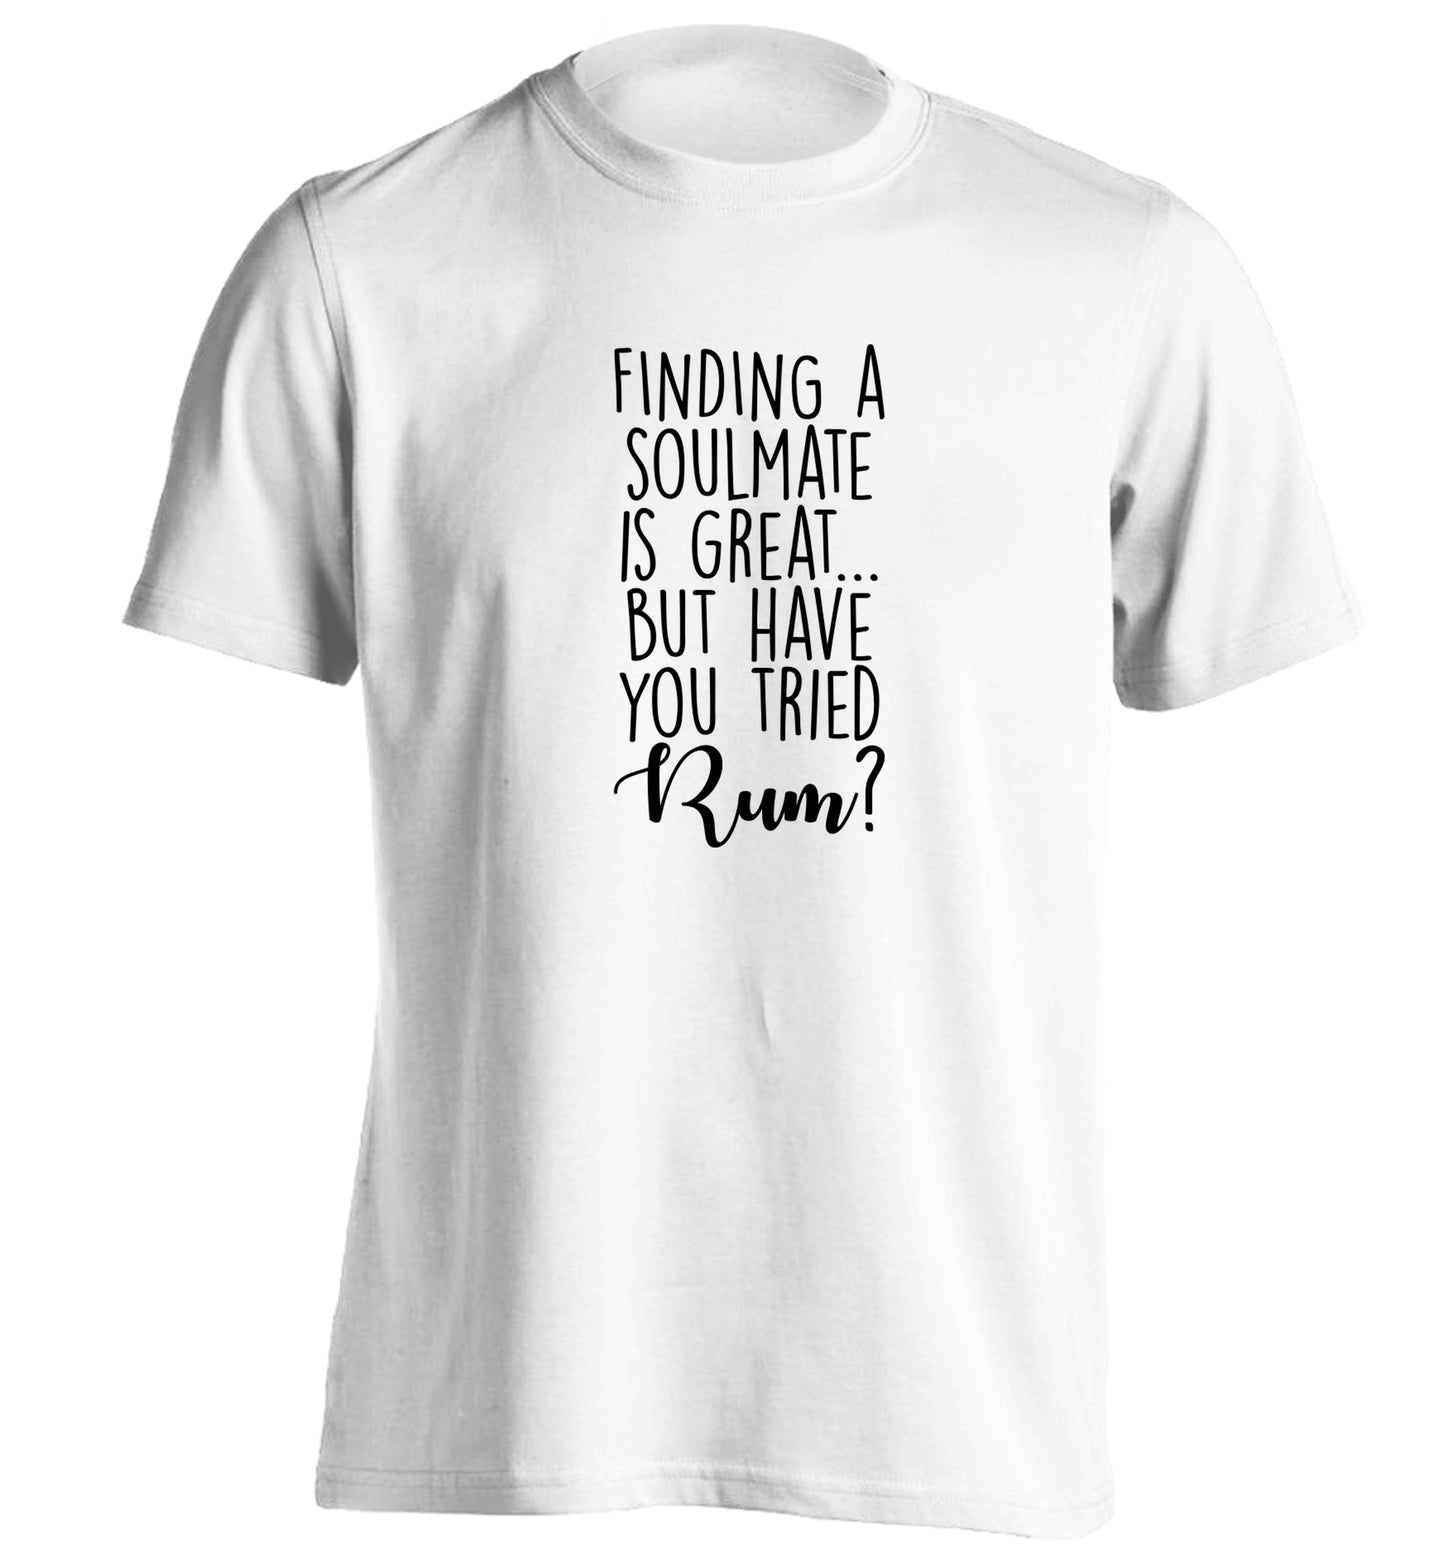 Finding a soulmate is great but have you tried rum? adults unisex white Tshirt 2XL